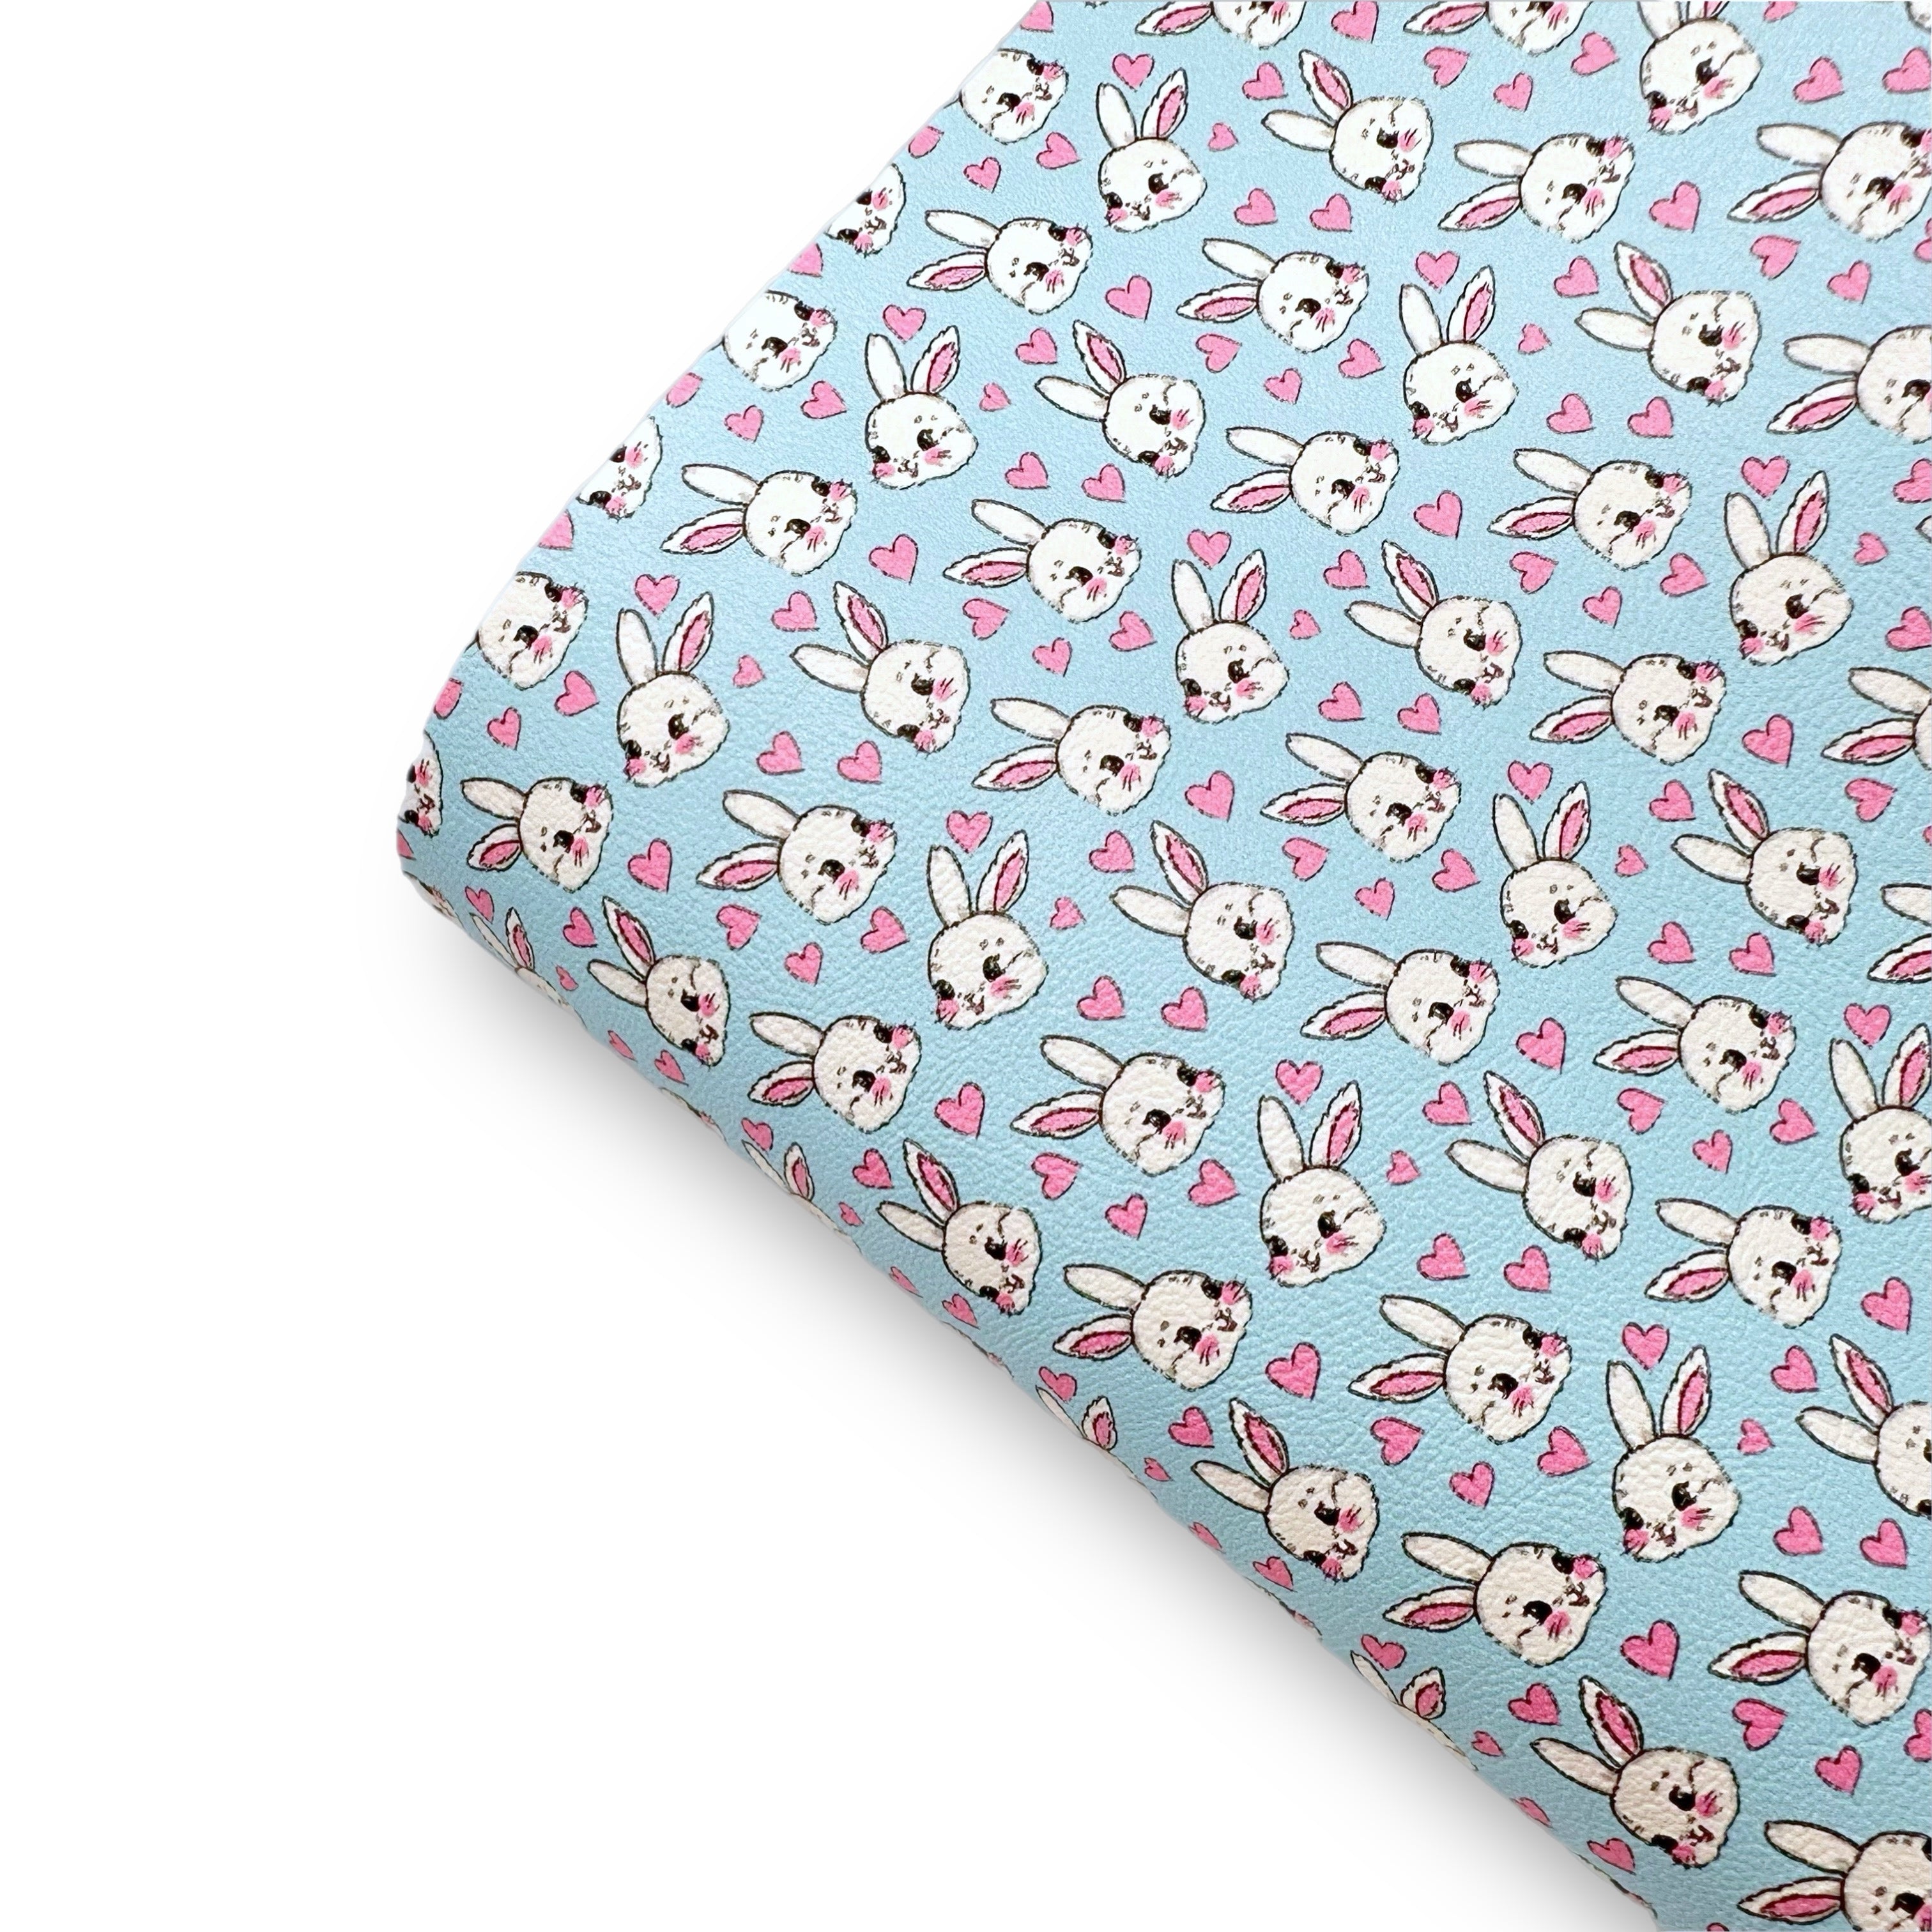 Bunny Hearts Blue Premium Faux Leather Fabric